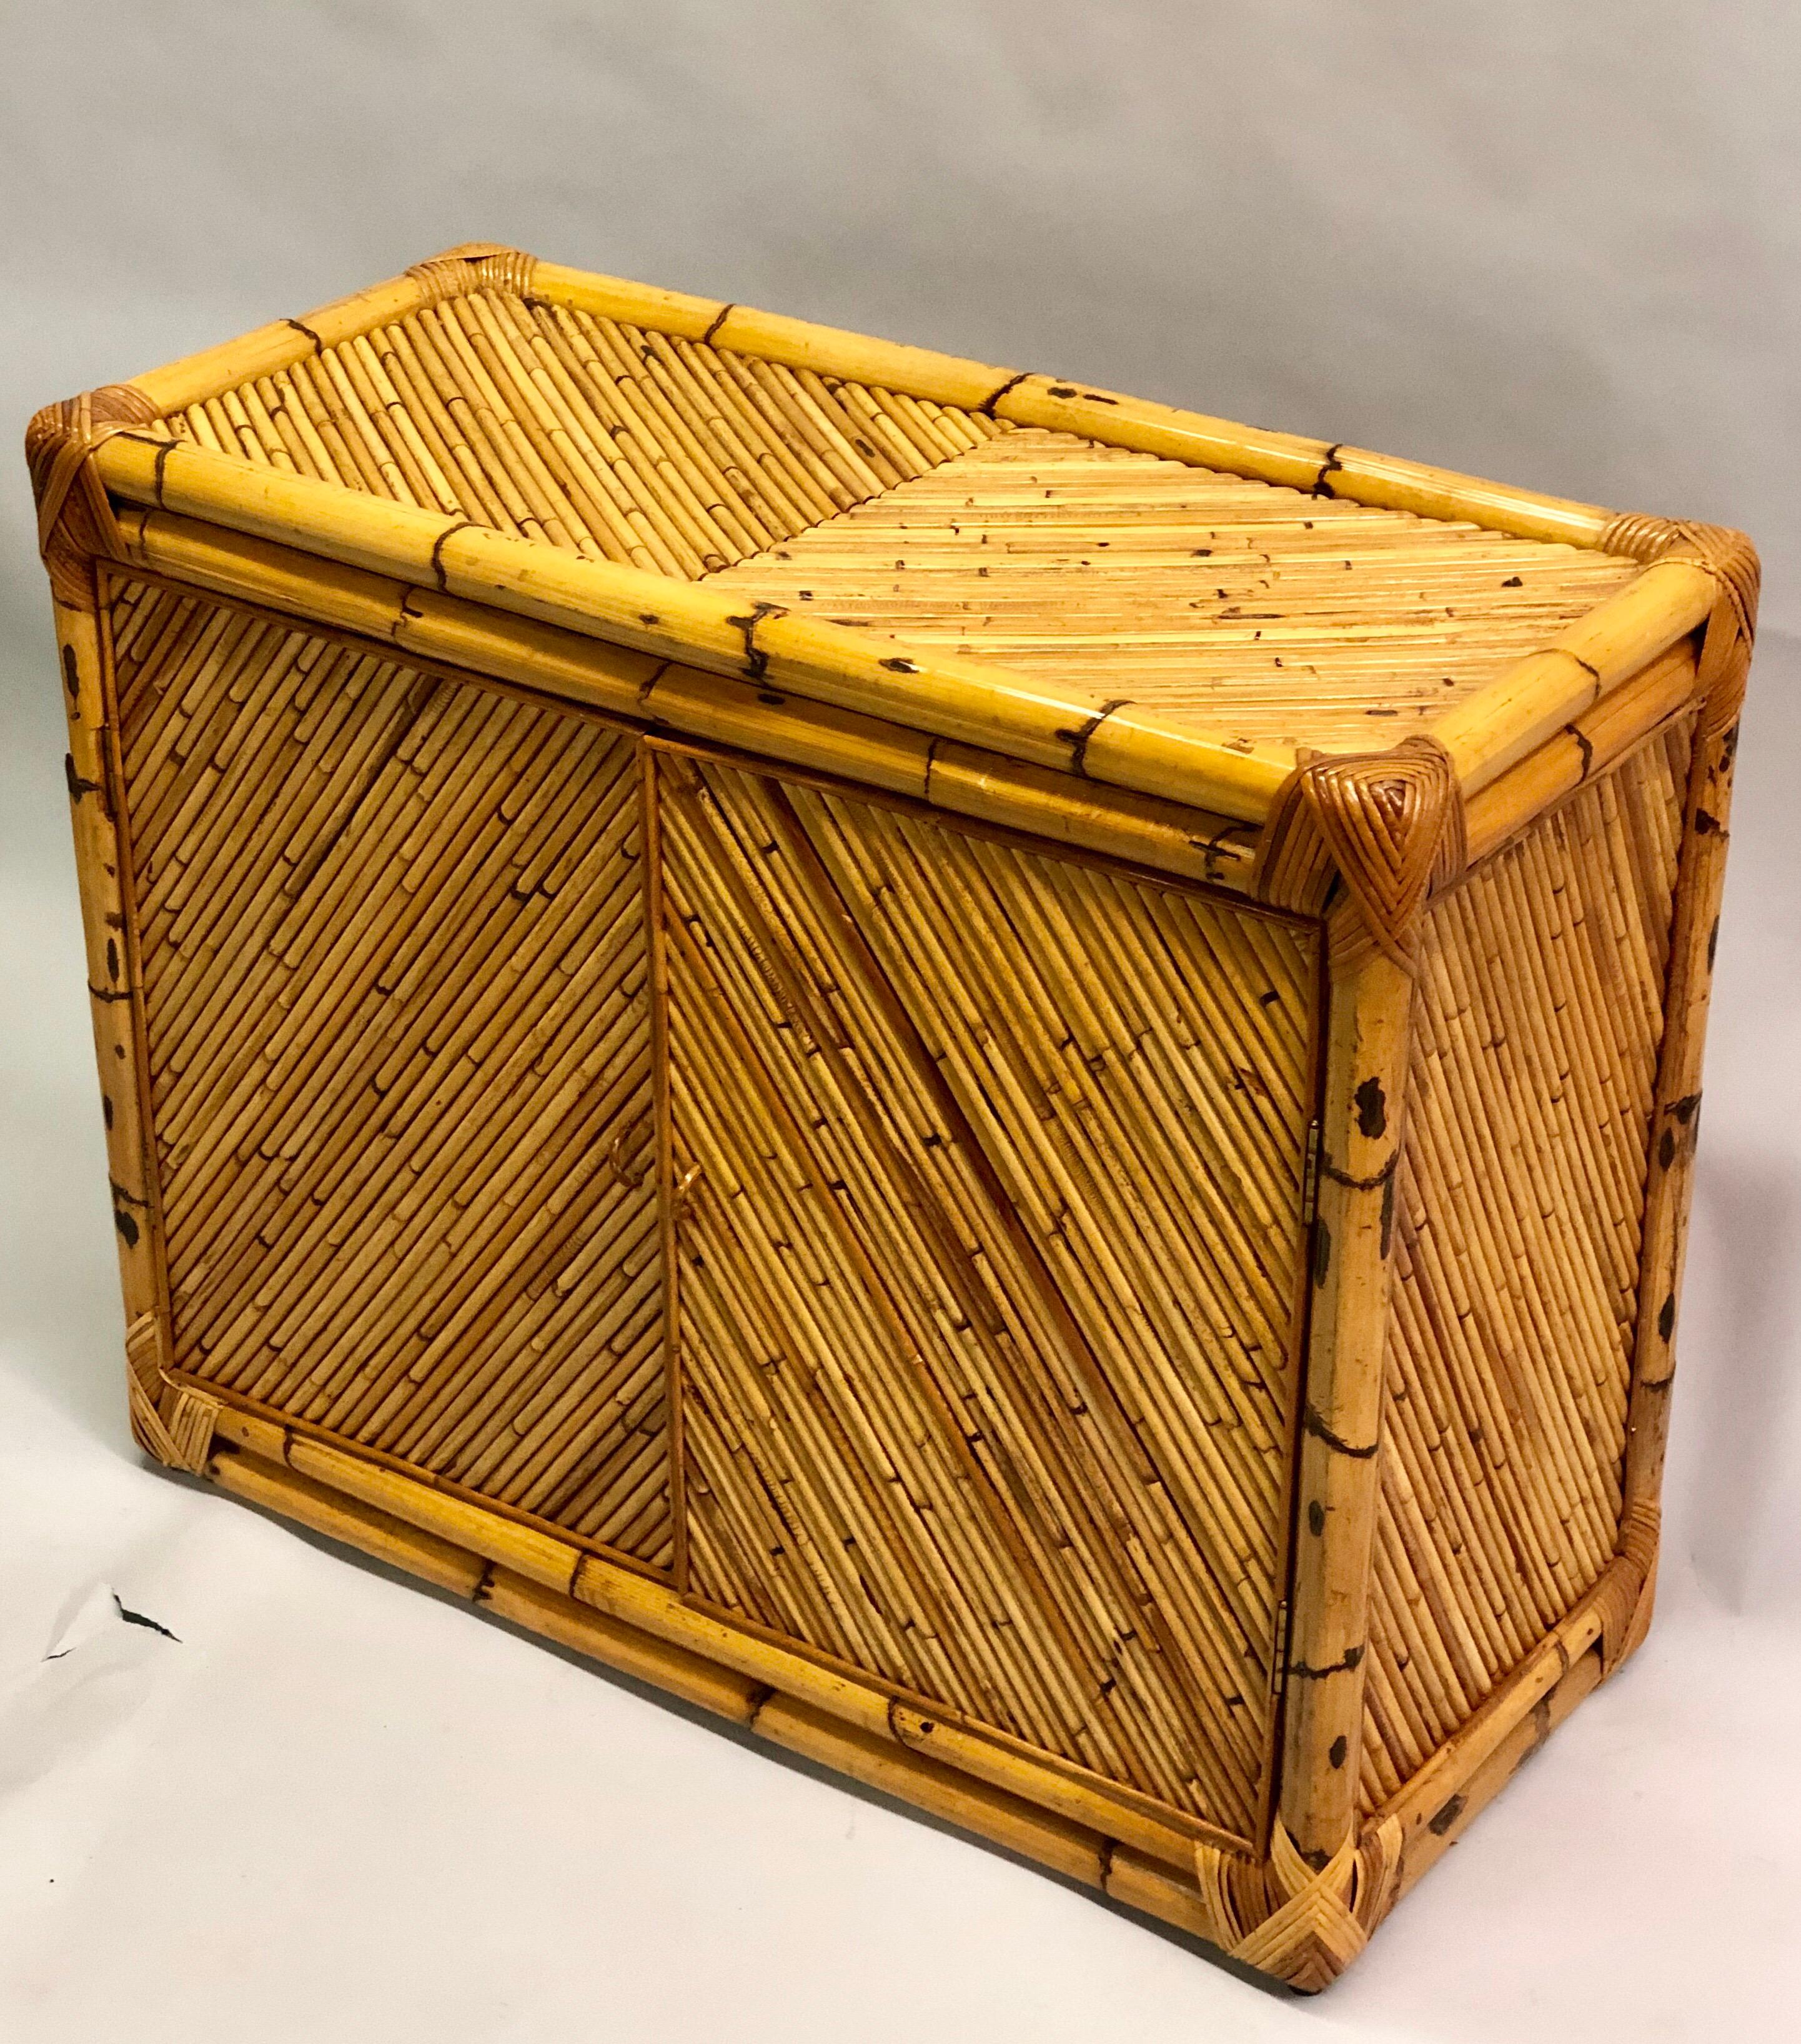 Elegant French Mid-Century Modern neoclassical influenced rattan and bamboo sideboard, buffet, commode or cabinet.

The rattan is cross-angled in a sober neoclassical chevron pattern on the top and doors. The sides are also cross-angled. 

Can